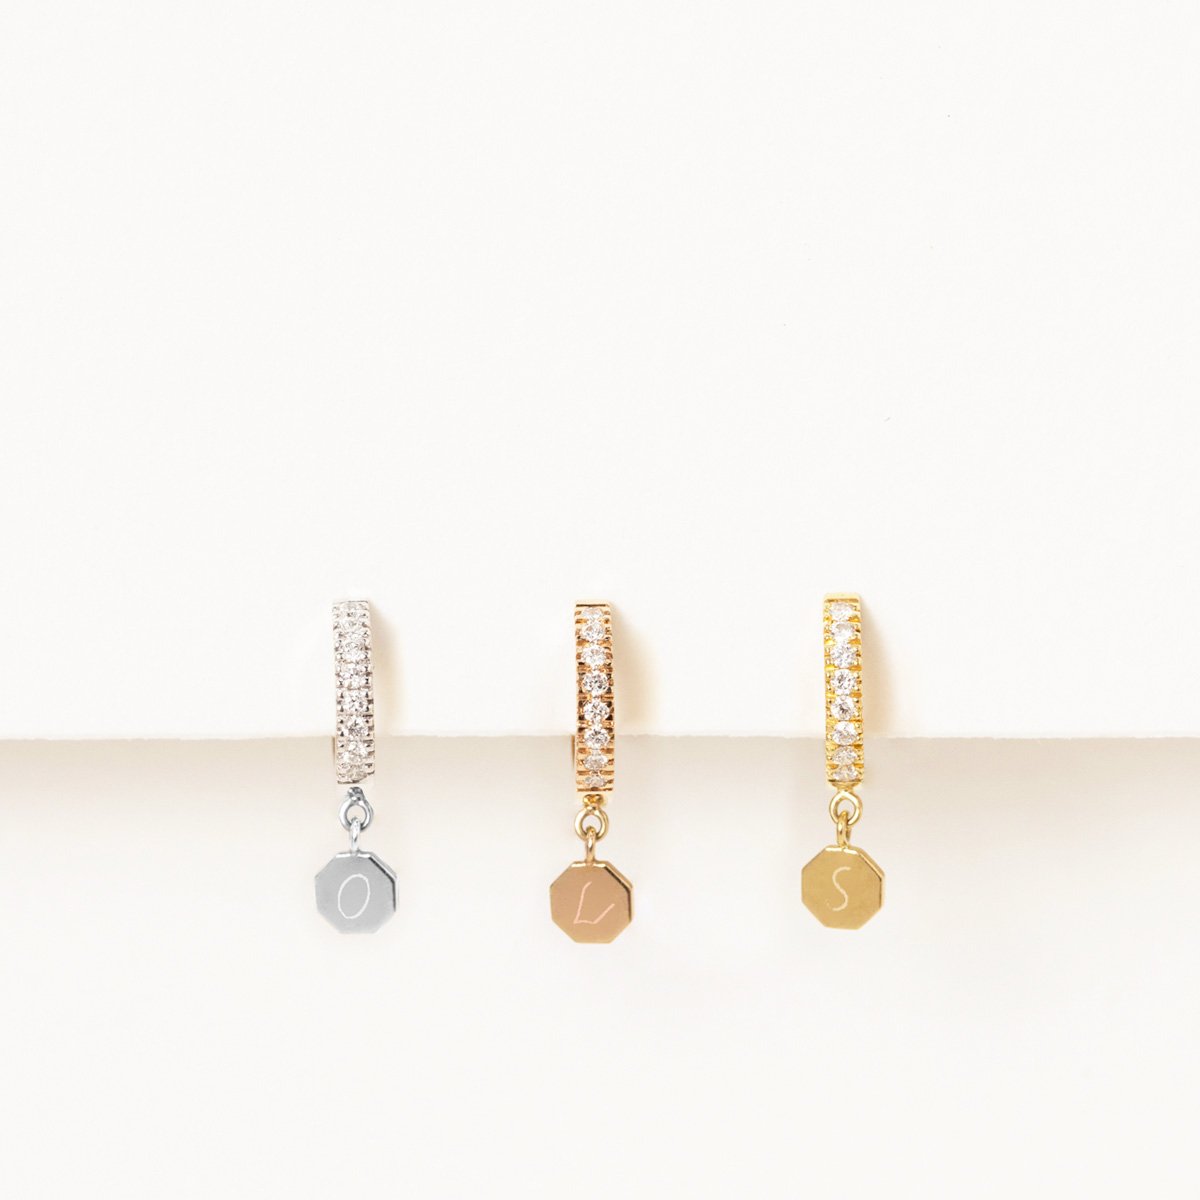 Personalized hoop earrings in 18K gold and diamonds